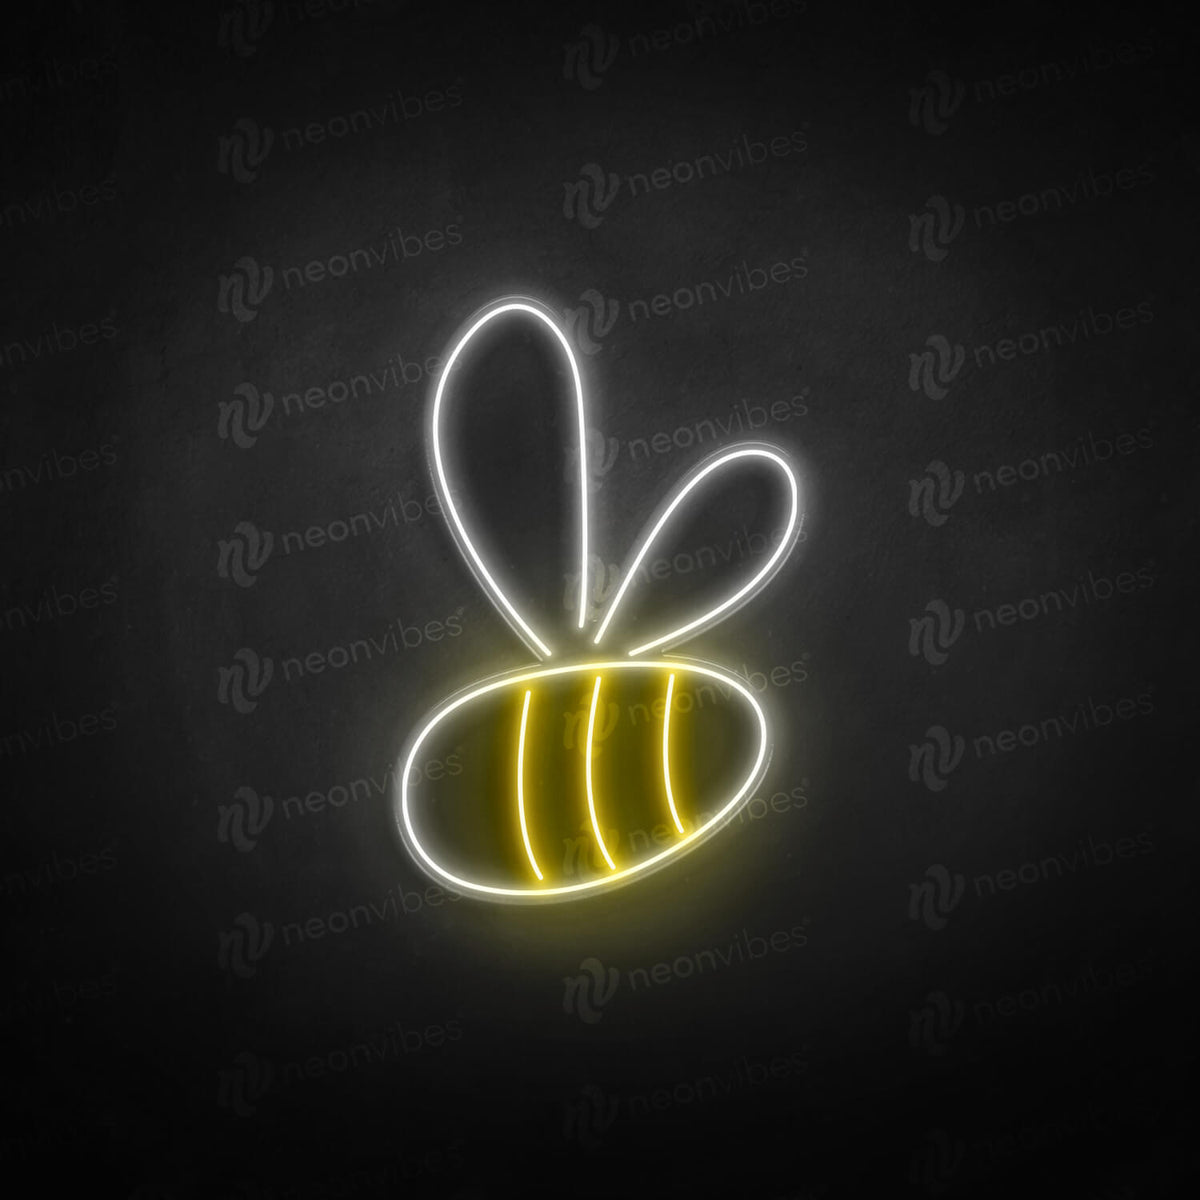 Bumble Bee neon sign